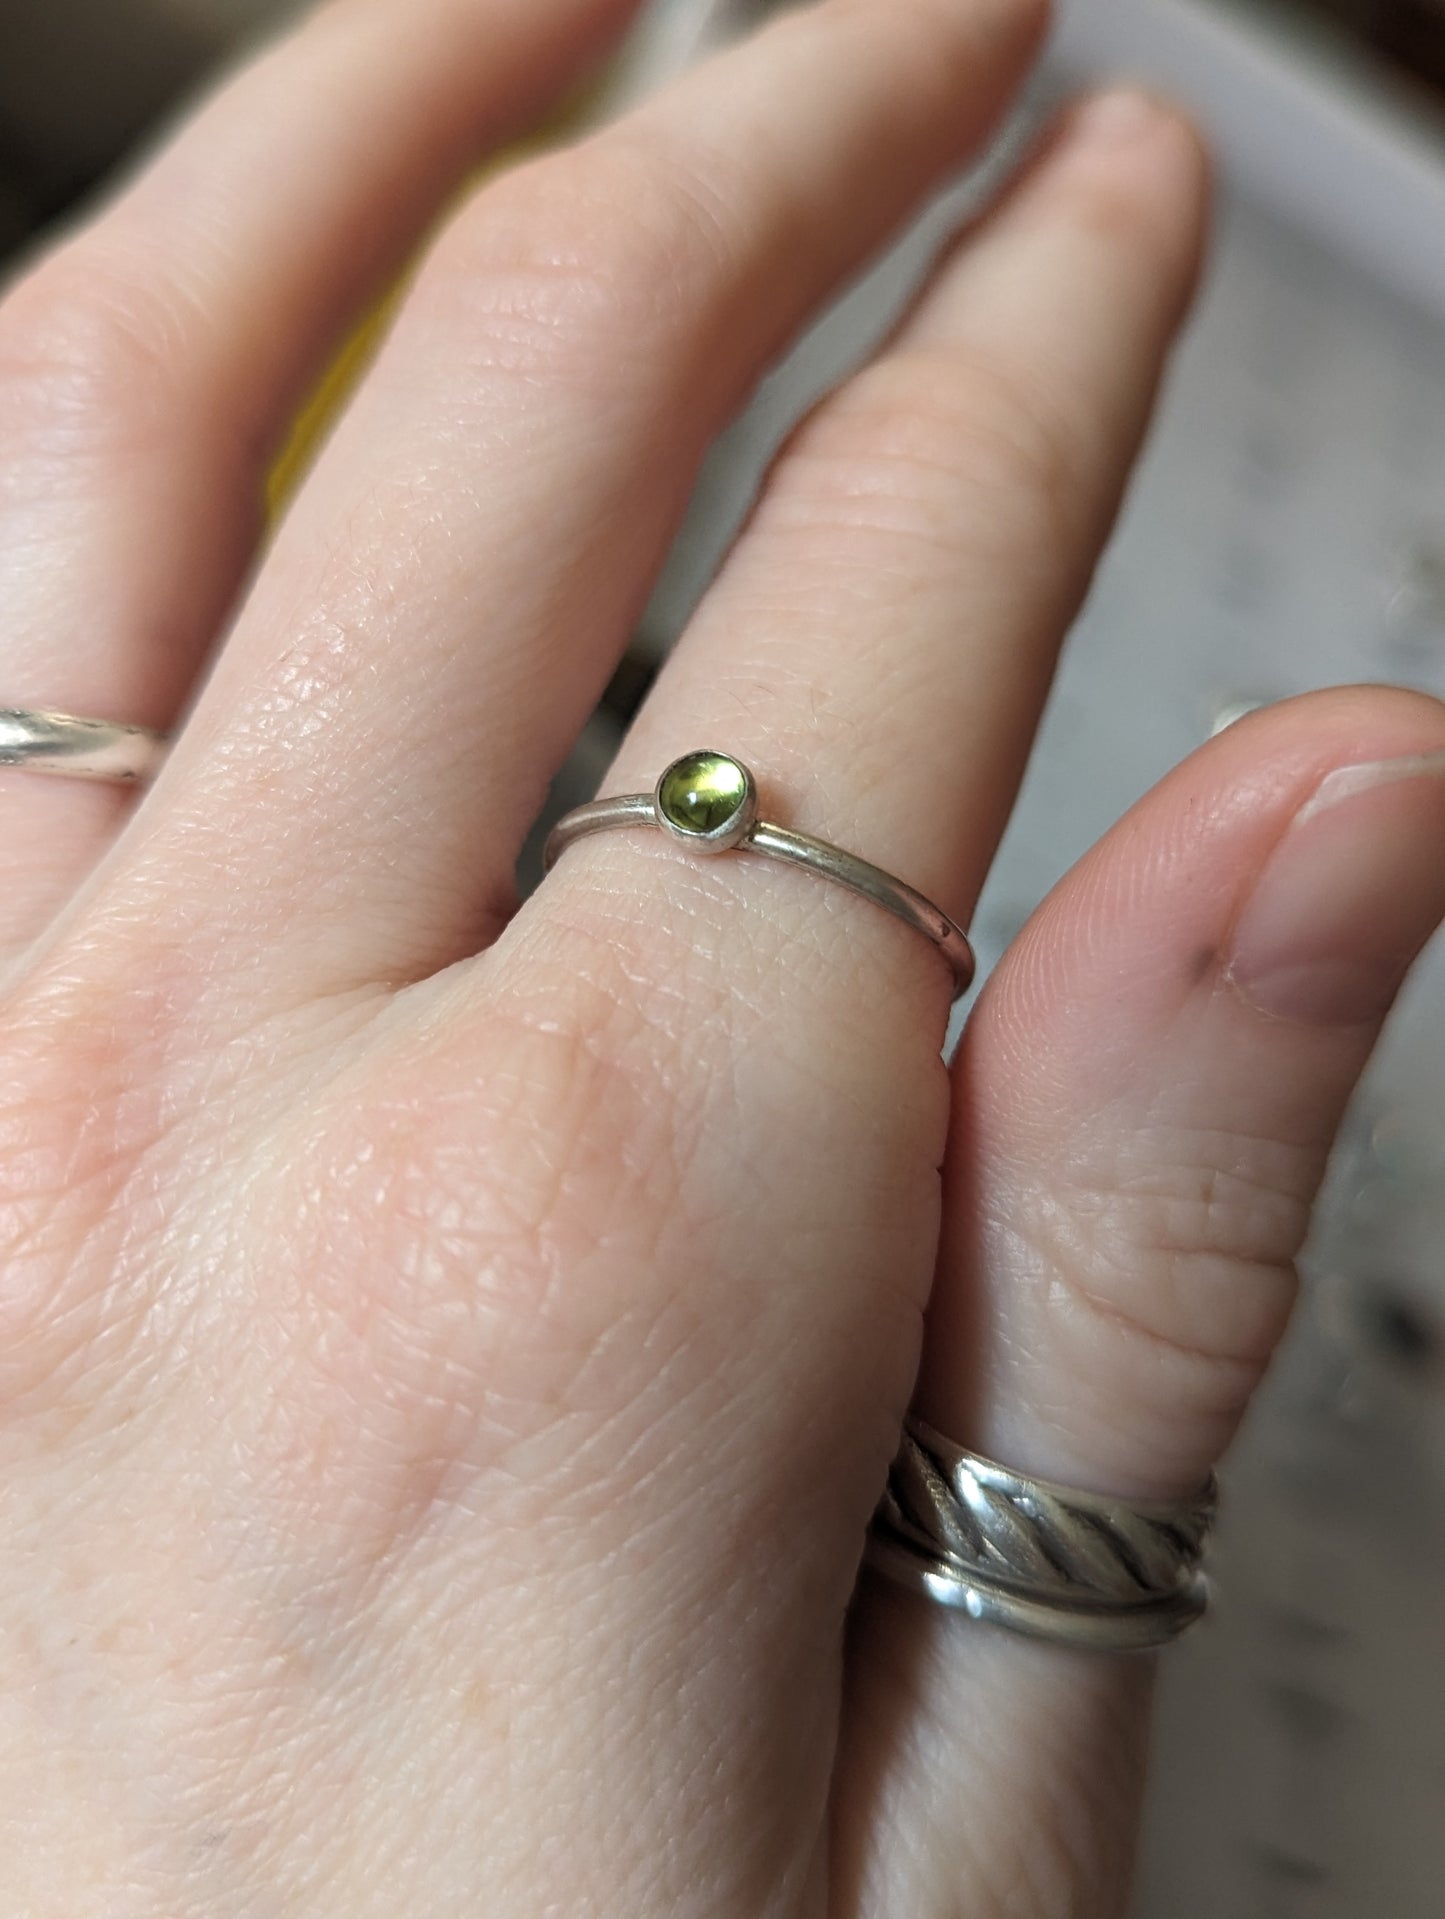 4mm Peridot Sterling Silver Stacker Ring - Size 8 + 9.5